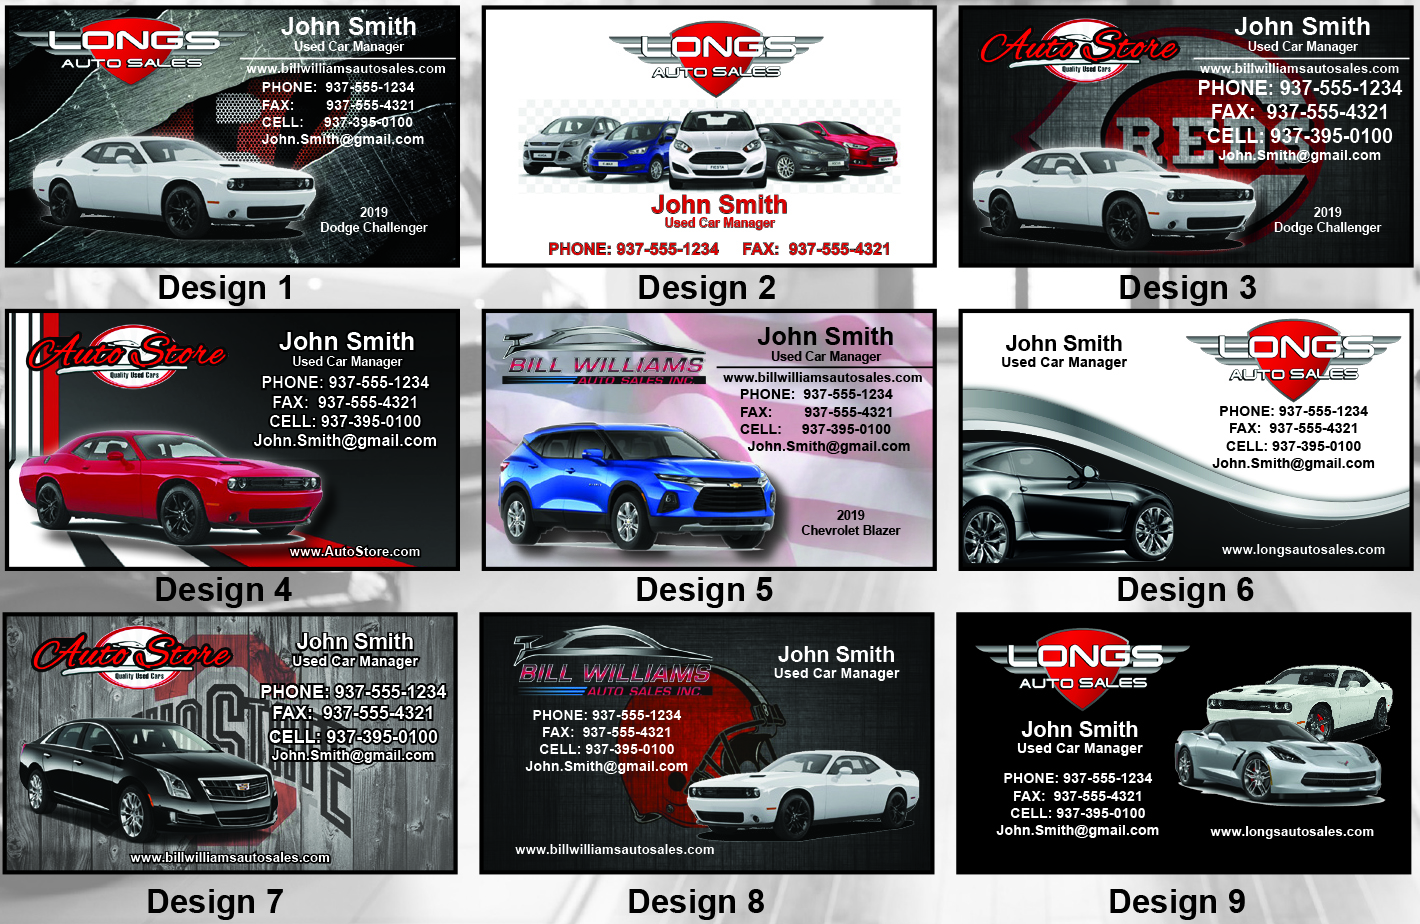 Printed Auto Dealership Business Cards